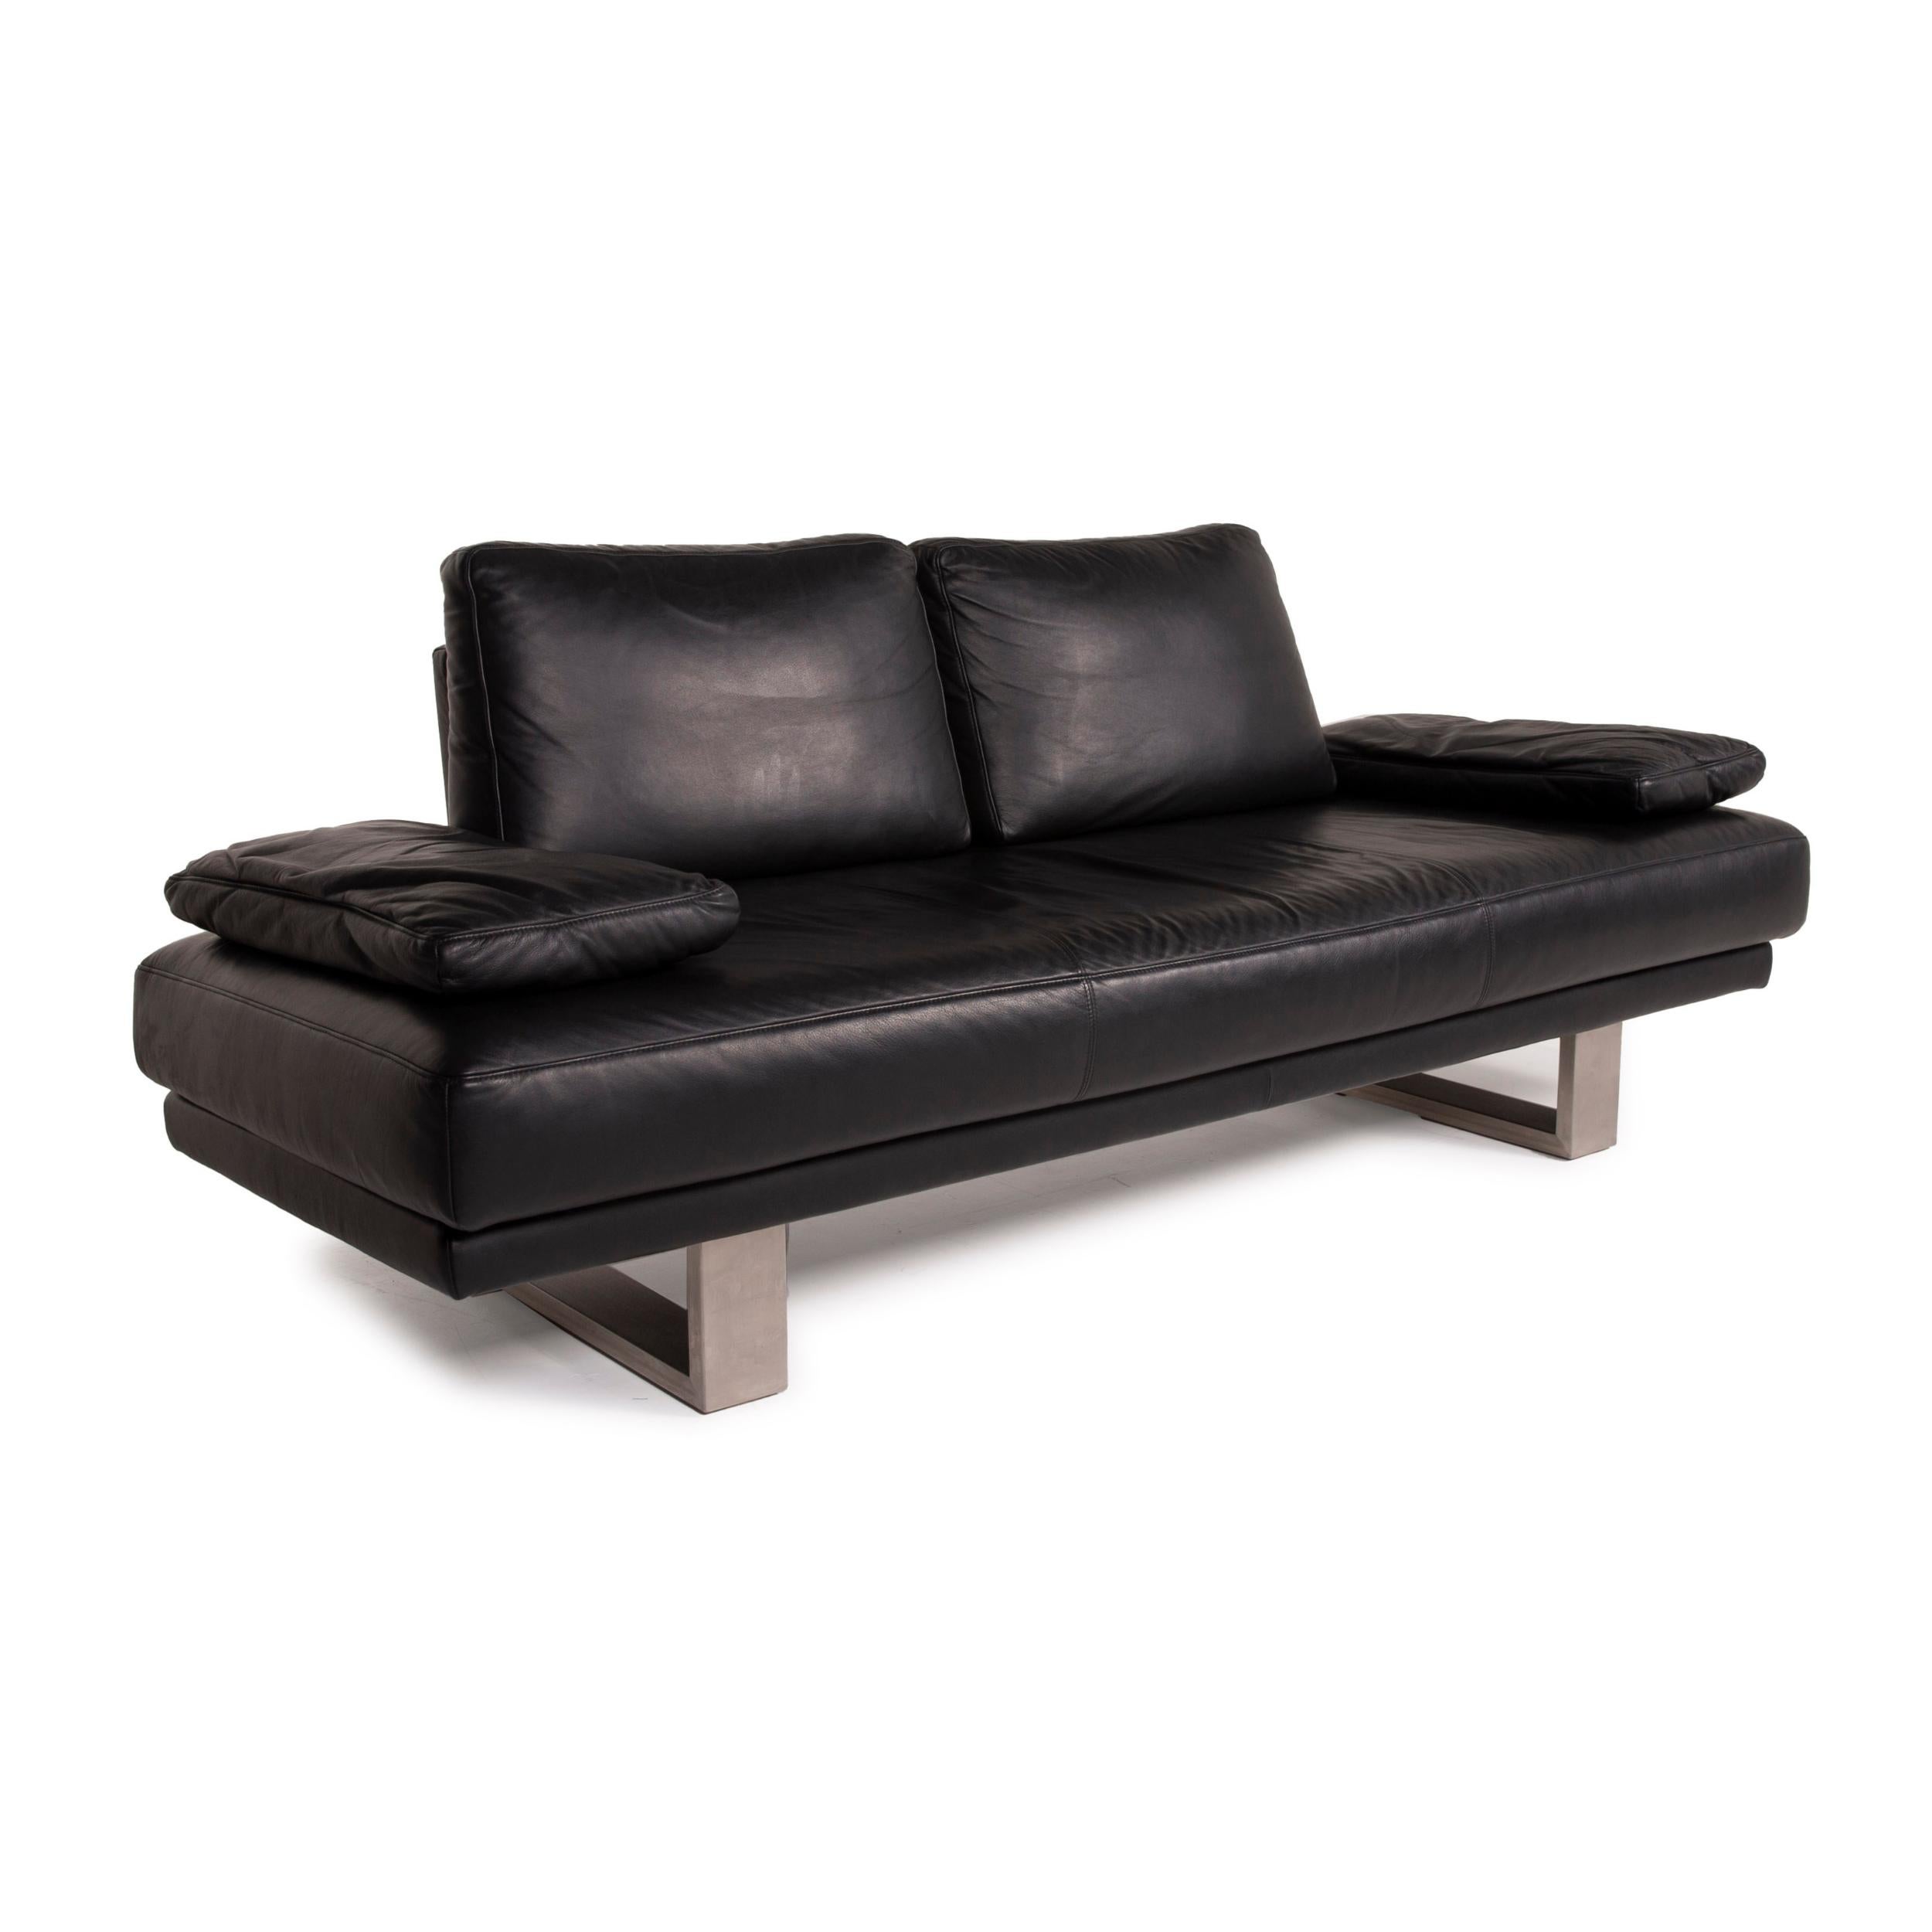 Rolf Benz 6600 Leather Sofa Black Two-Seater 1